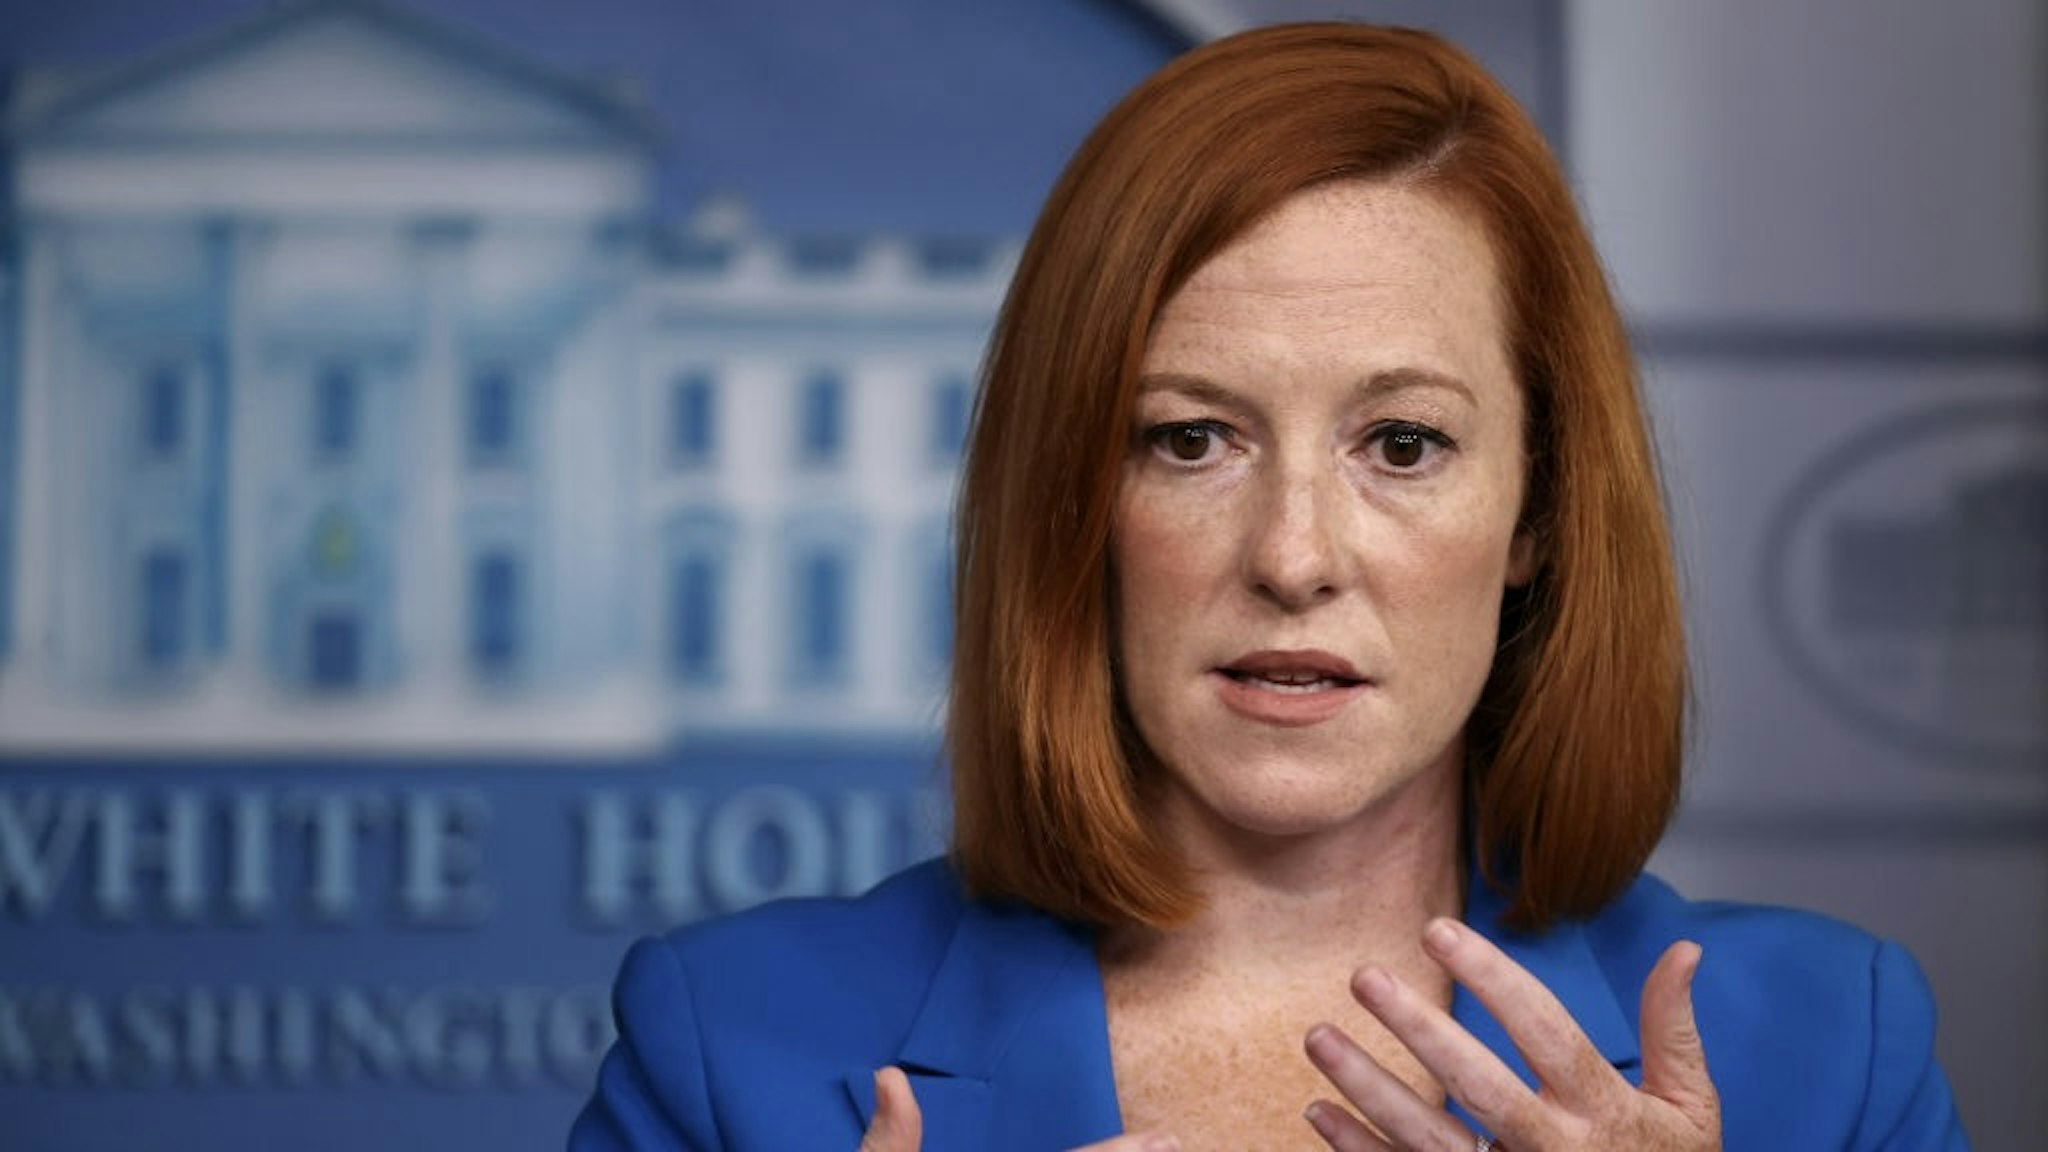 White House Press Secretary Jen Psaki Holds Daily Briefing WASHINGTON, DC - AUGUST 30: White House Press Secretary Jen Pskai talks to reporters during the daily news conference in the Brady Press Briefing Room at the White House on August 30, 2021 in Washington, DC. Psaki fielded questions about Hurricane Ida, the ongoing pull out of U.S. military forces and their allies from Afghanistan and other topics. (Photo by Chip Somodevilla/Getty Images) Chip Somodevilla / Staff via Getty Images